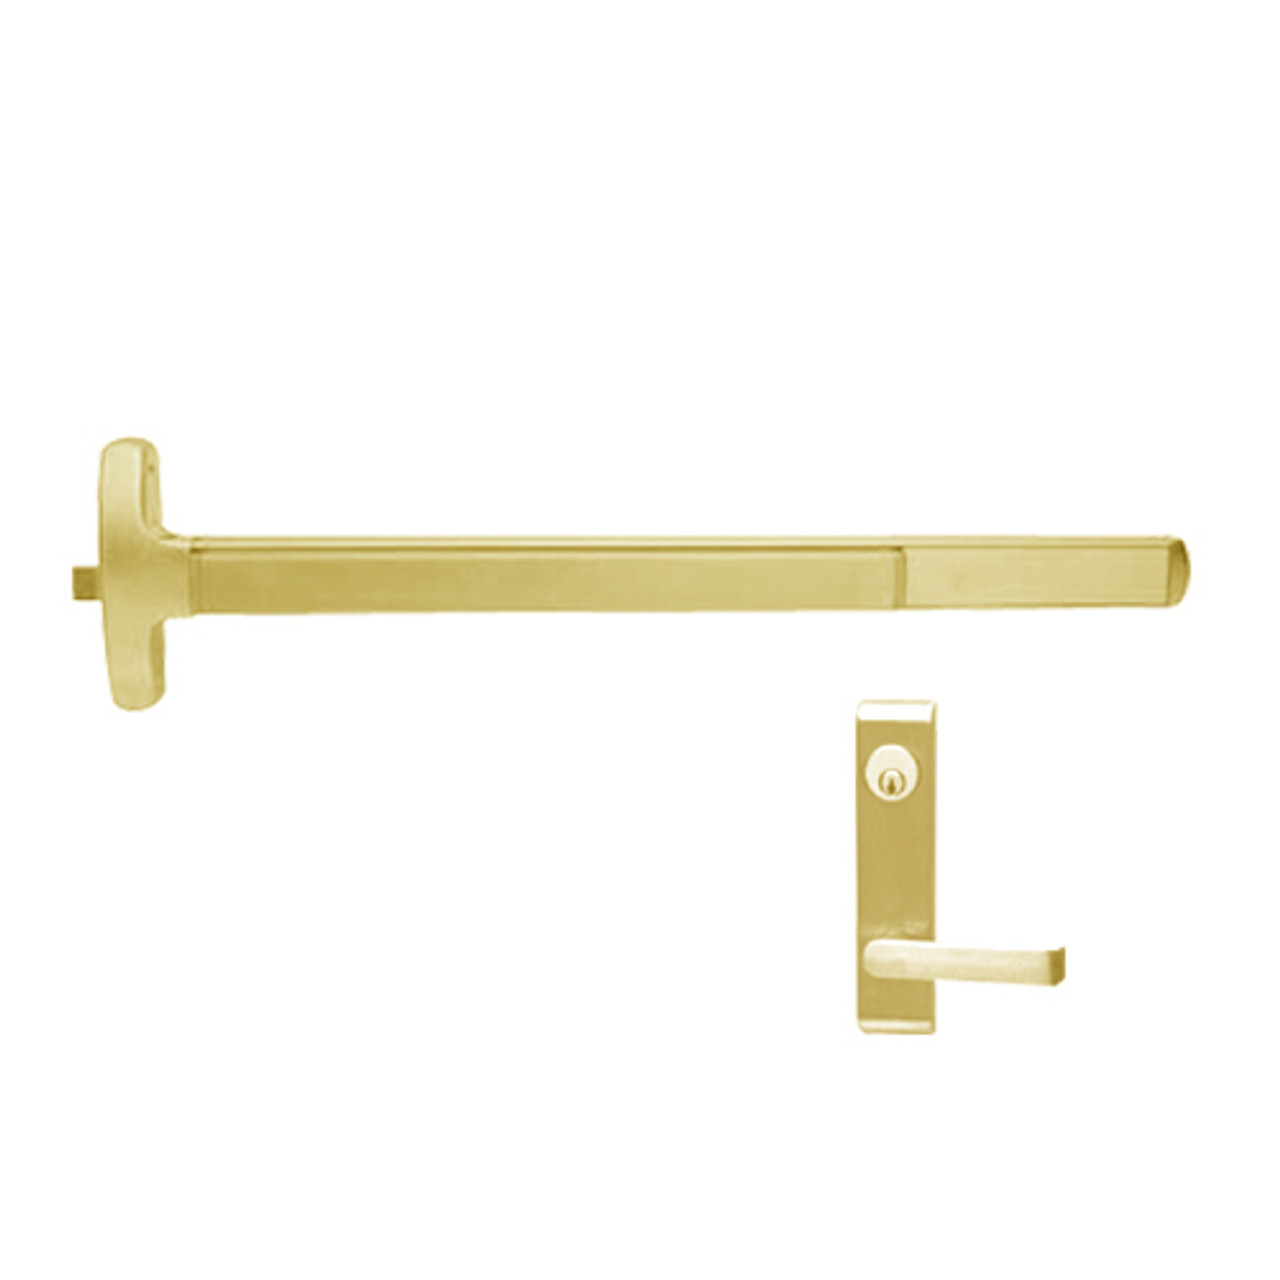 F-24-R-L-DANE-US3-3-LHR Falcon Exit Device in Polished Brass